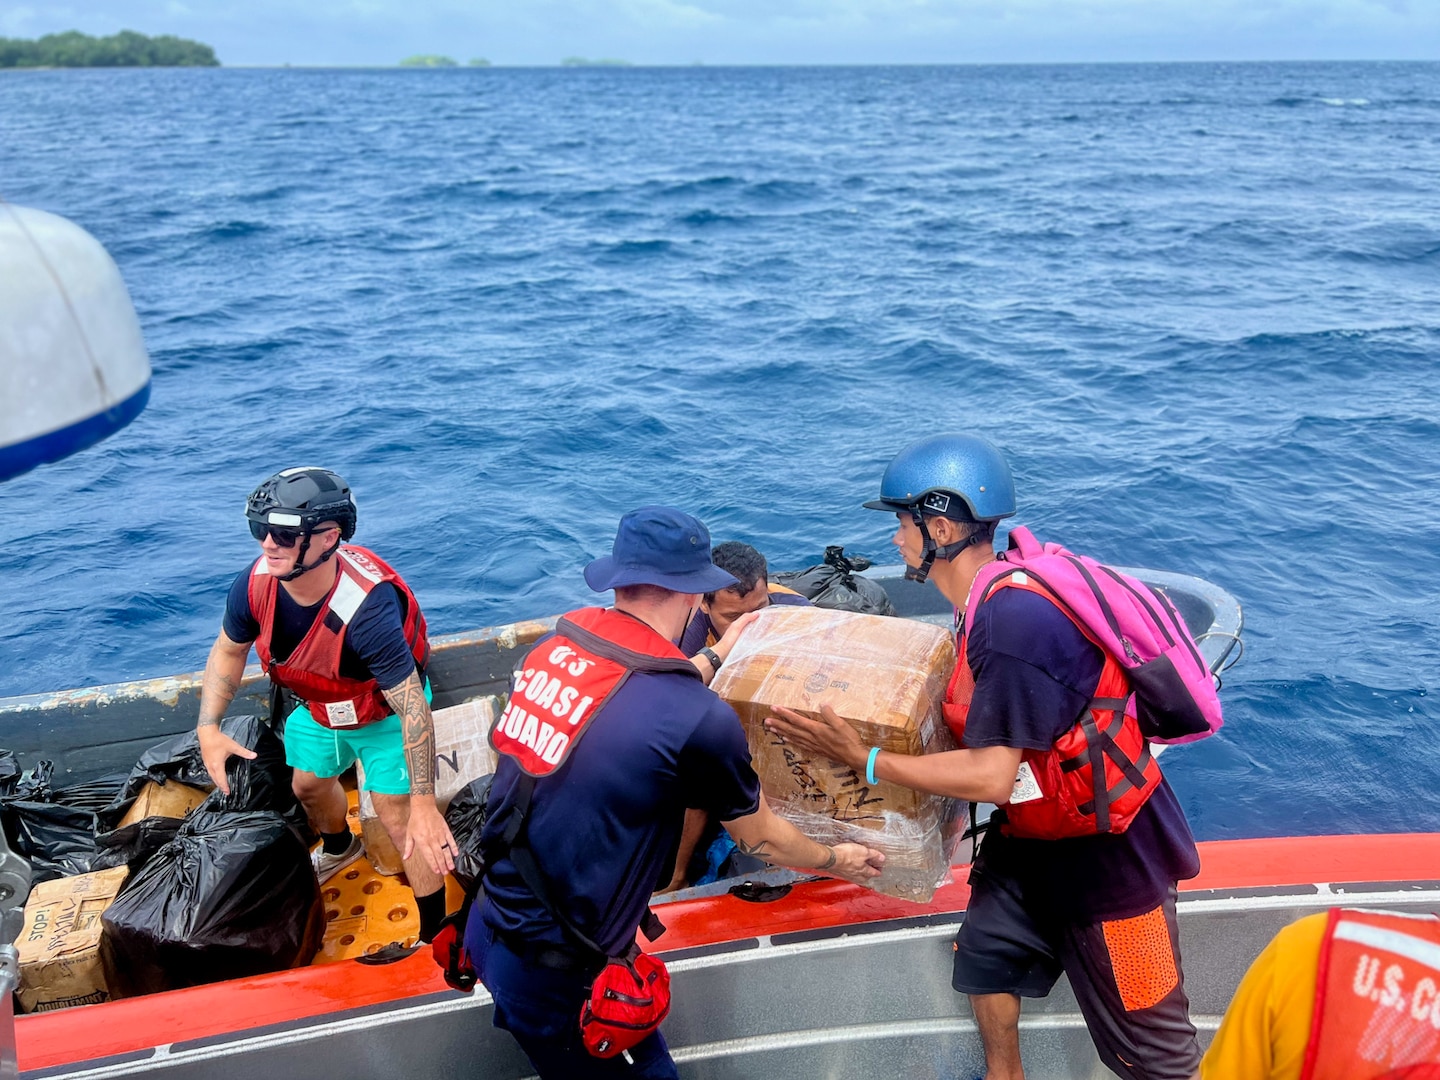 The USCGC Oliver Henry (WPC 1140) crew deliver supplies and the principal to Nukuoro, an atoll in the Federated States of Micronesia on Sept. 24, 2023. The team returned to homeport on Oct. 15 after a 28-day patrol that reinforced the U.S. commitment to sovereignty and resource security in the Federated States of Micronesia Exclusive Economic Zone (EEZ) and beyond. The mission, which was part of Operation Rematau and the broader U.S. Coast Guard's Operation Blue Pacific, fortifies the U.S. reputation as a reliable, trusted partner in the region. (U.S. Coast Guard photo by Petty Officer 2nd Class Breandan Muldowney)